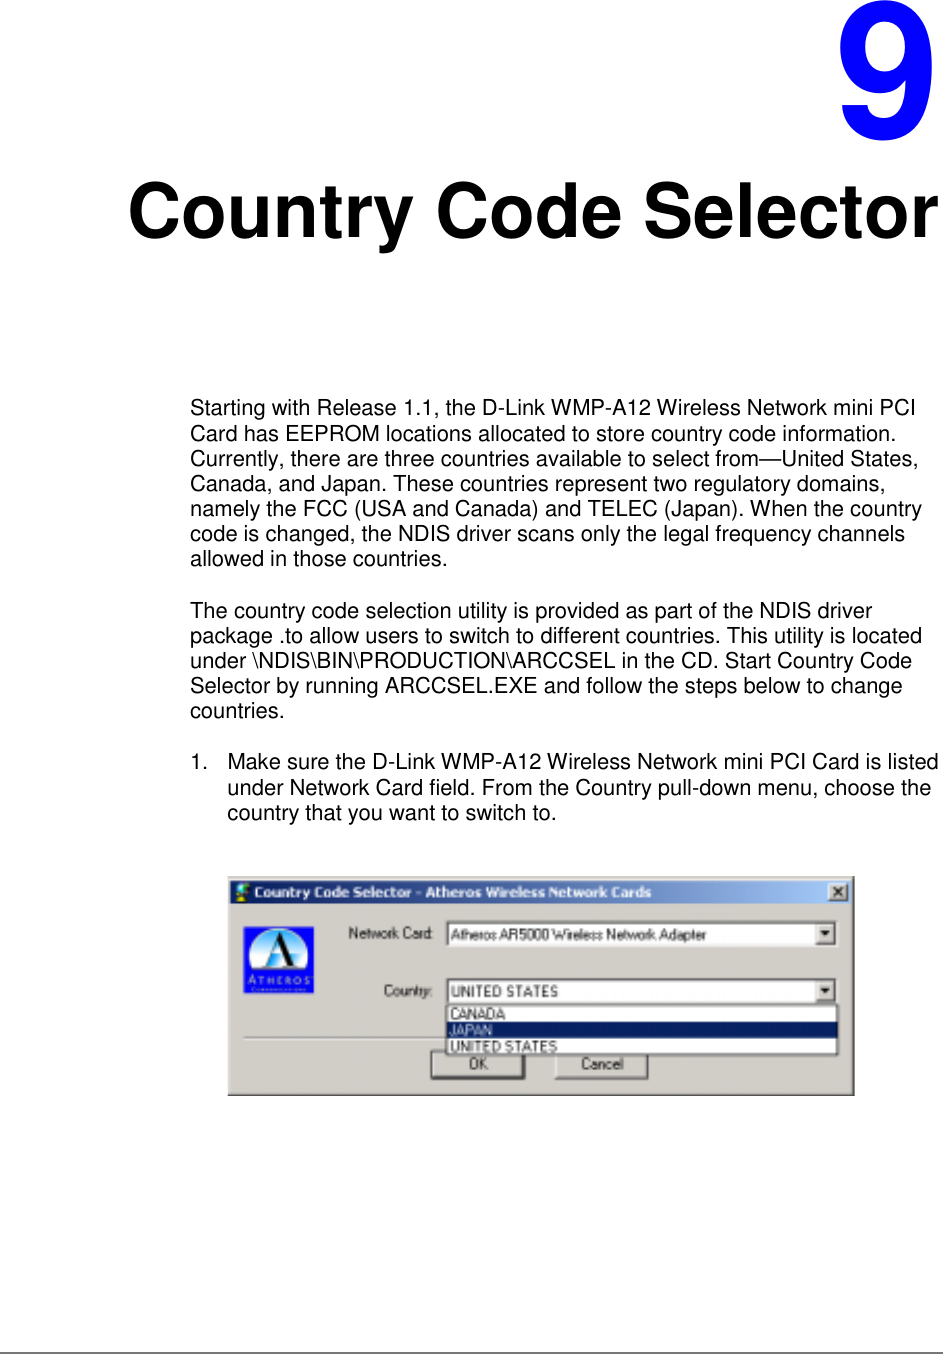 9Country Code SelectorStarting with Release 1.1, the D-Link WMP-A12 Wireless Network mini PCICard has EEPROM locations allocated to store country code information.Currently, there are three countries available to select from—United States,Canada, and Japan. These countries represent two regulatory domains,namely the FCC (USA and Canada) and TELEC (Japan). When the countrycode is changed, the NDIS driver scans only the legal frequency channelsallowed in those countries.The country code selection utility is provided as part of the NDIS driverpackage .to allow users to switch to different countries. This utility is locatedunder \NDIS\BIN\PRODUCTION\ARCCSEL in the CD. Start Country CodeSelector by running ARCCSEL.EXE and follow the steps below to changecountries.1.  Make sure the D-Link WMP-A12 Wireless Network mini PCI Card is listedunder Network Card field. From the Country pull-down menu, choose thecountry that you want to switch to.